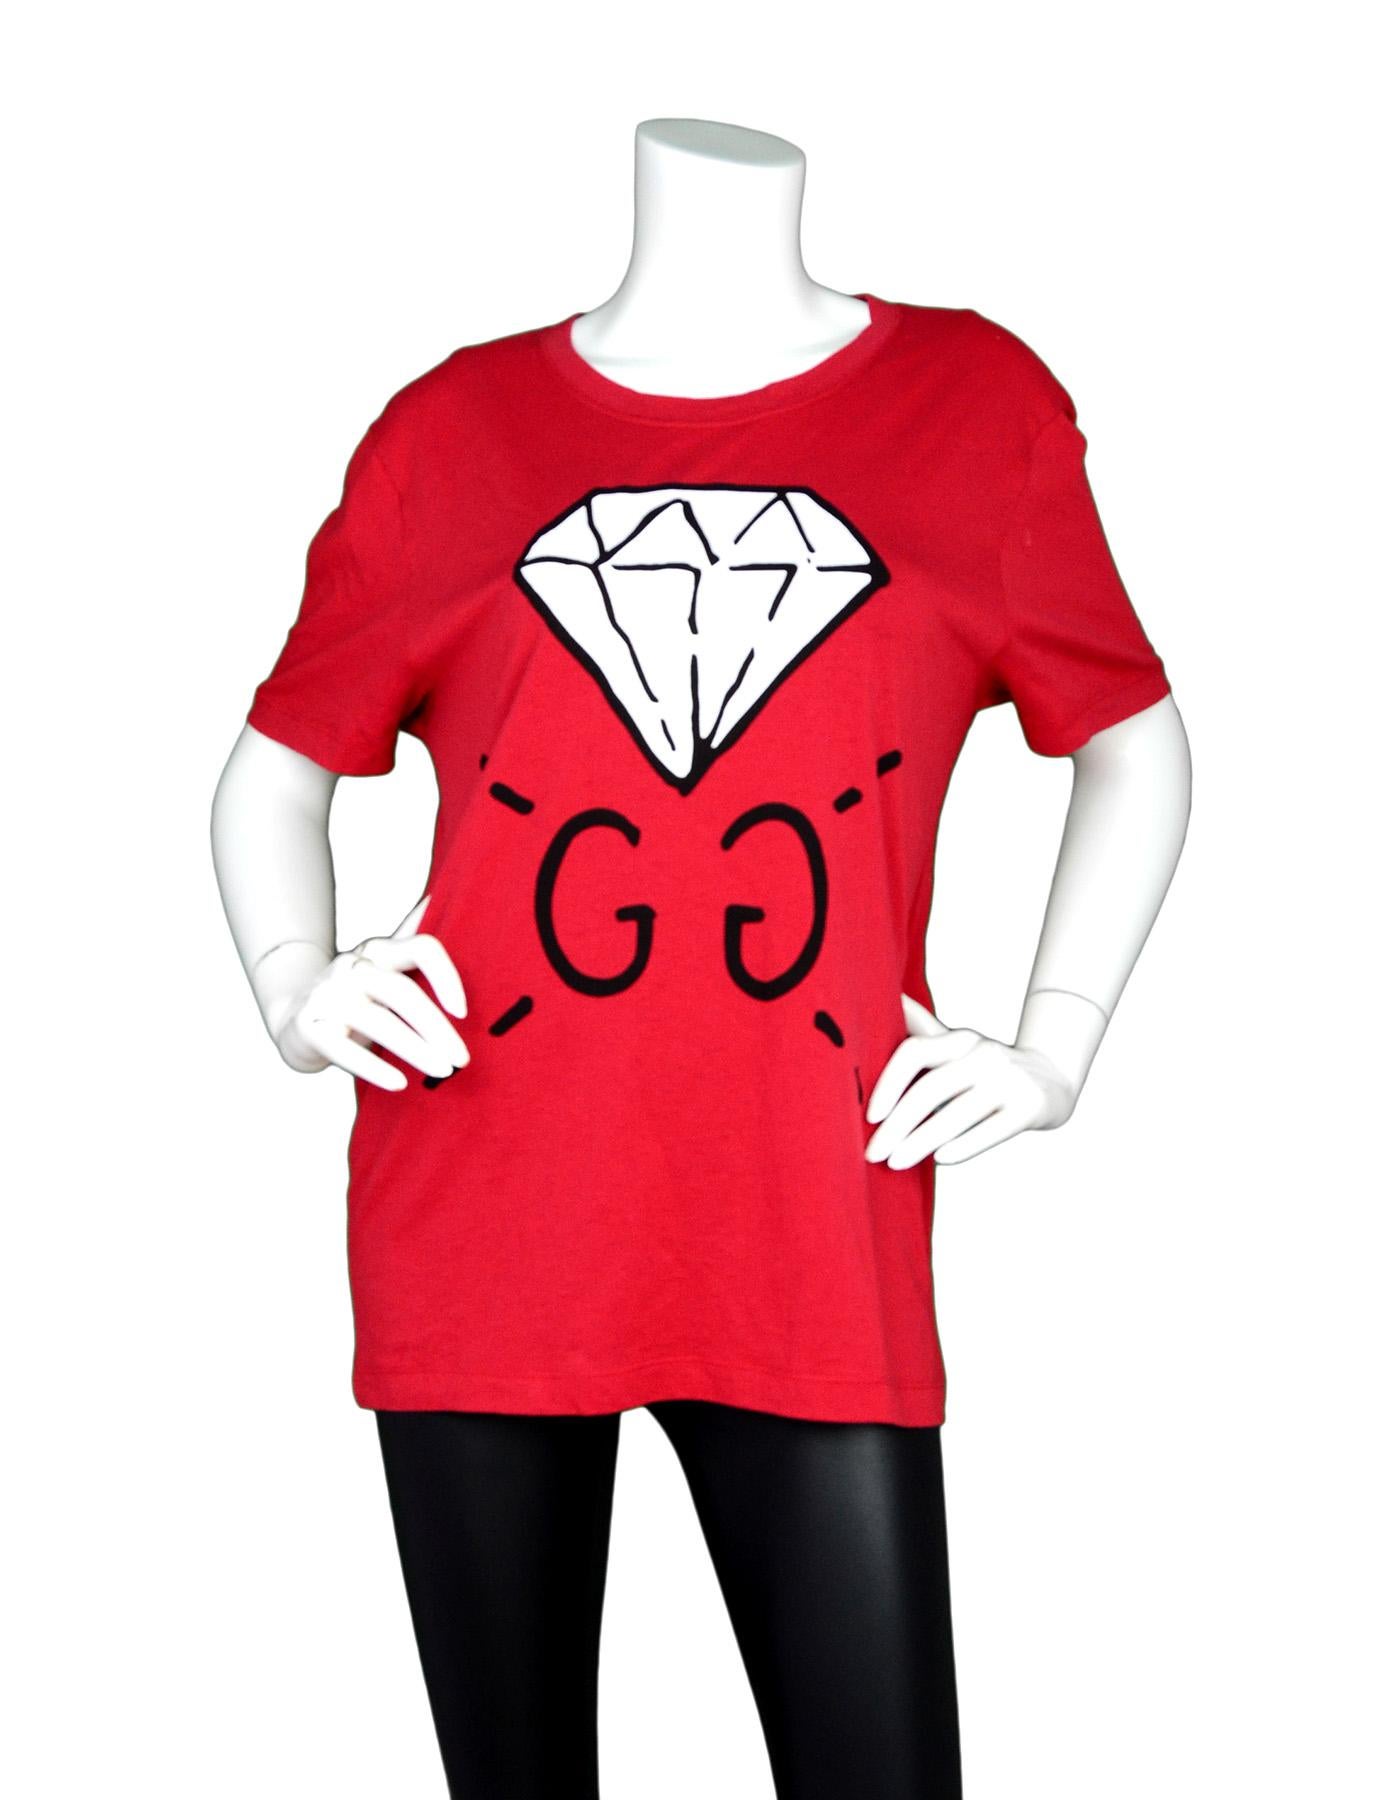 Gucci Men's 2016 Red GG Ghost T-Shirt sz S

Made In: Italy
Color: Red, white, black
Composition: 100% cotton
Lining: None
Closure/Opening: Pull over 
Exterior Pockets: None
Interior Pockets: None
Overall Condition: Excellent pre-owned condition with